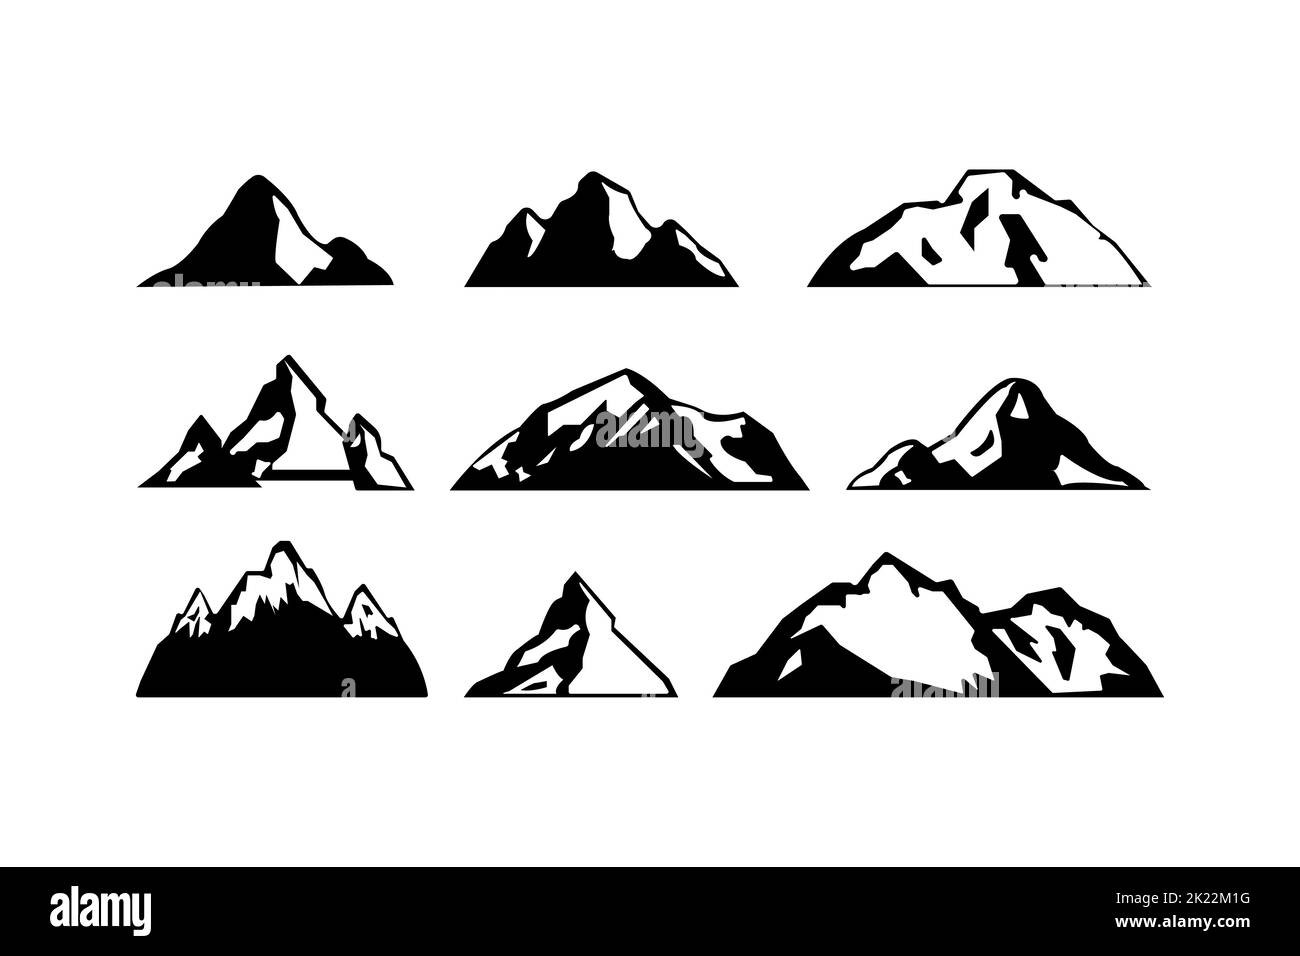 Mountain Silhouettes Clip-art collection set, isolated on white background. Stock Vector